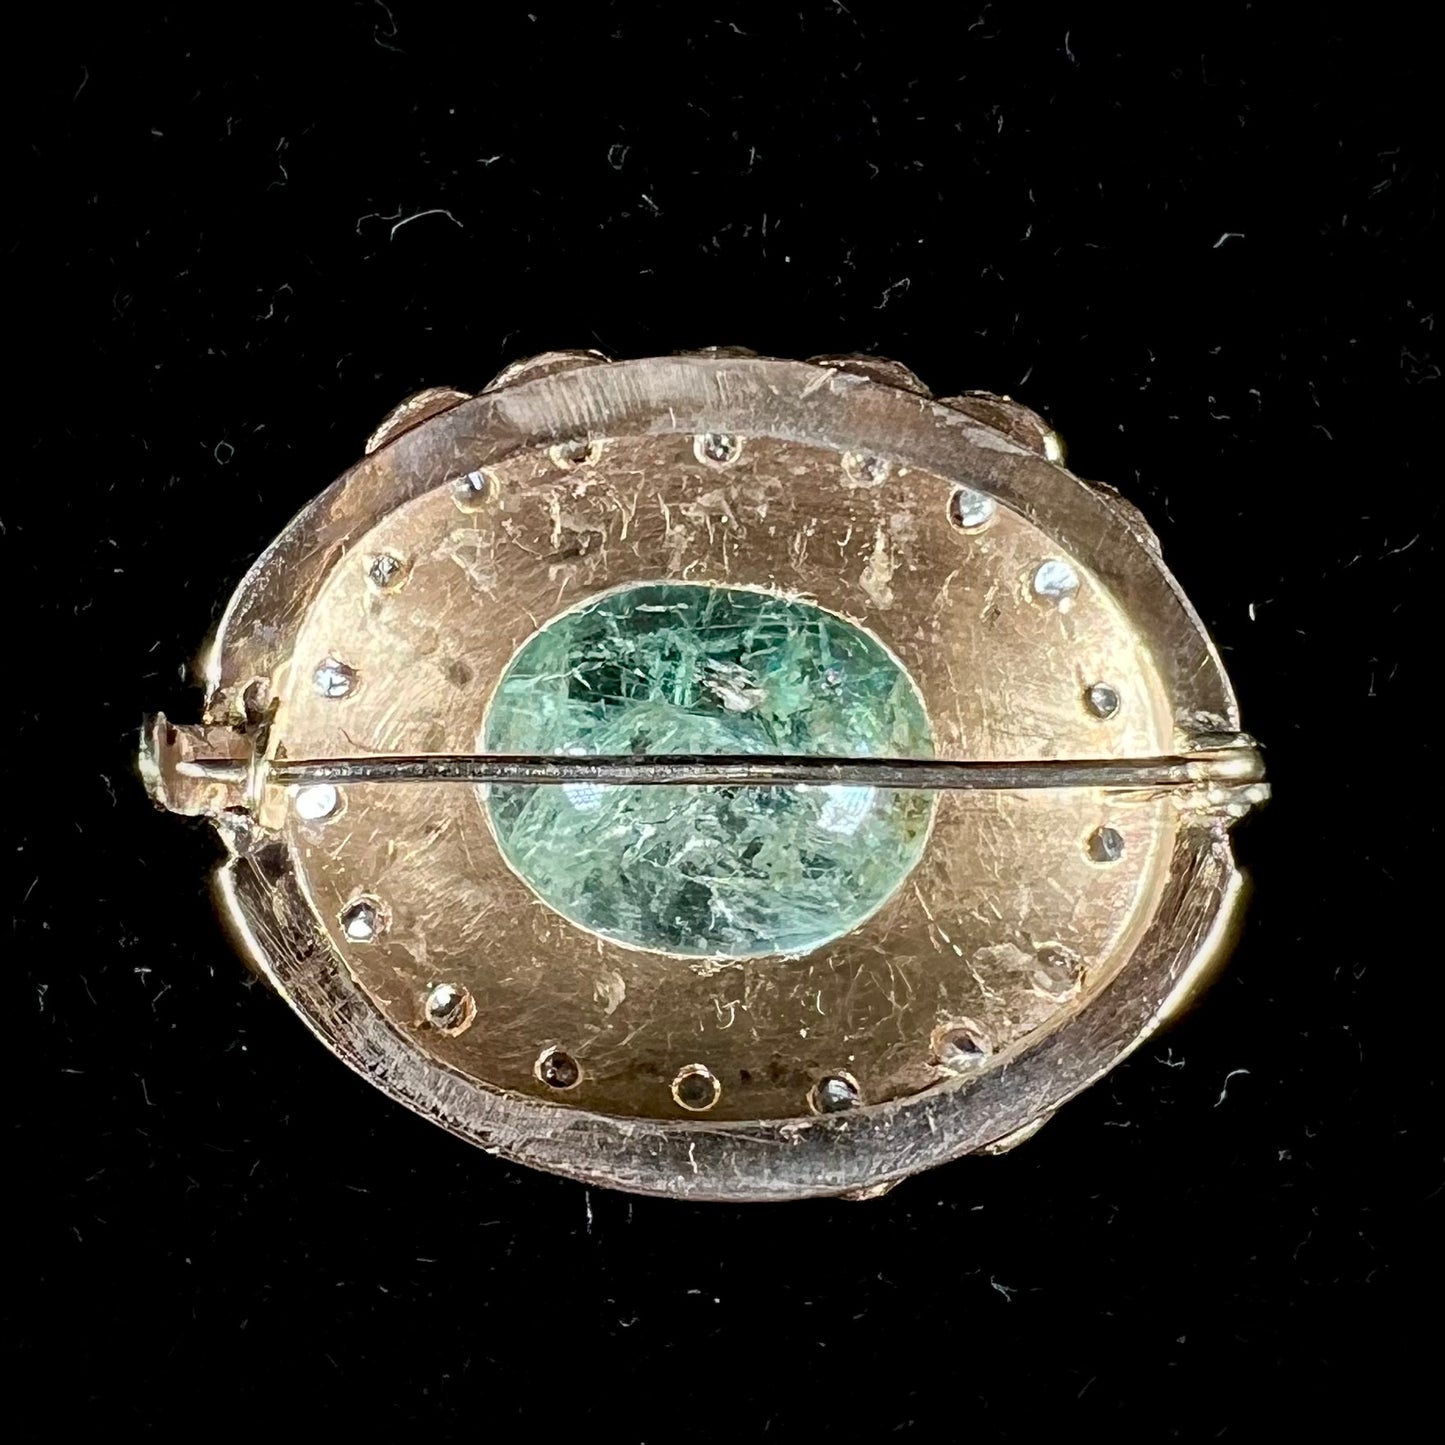 An antique 1800's Victorian emerald and diamond crystal brooch made in 18kt yellow gold.